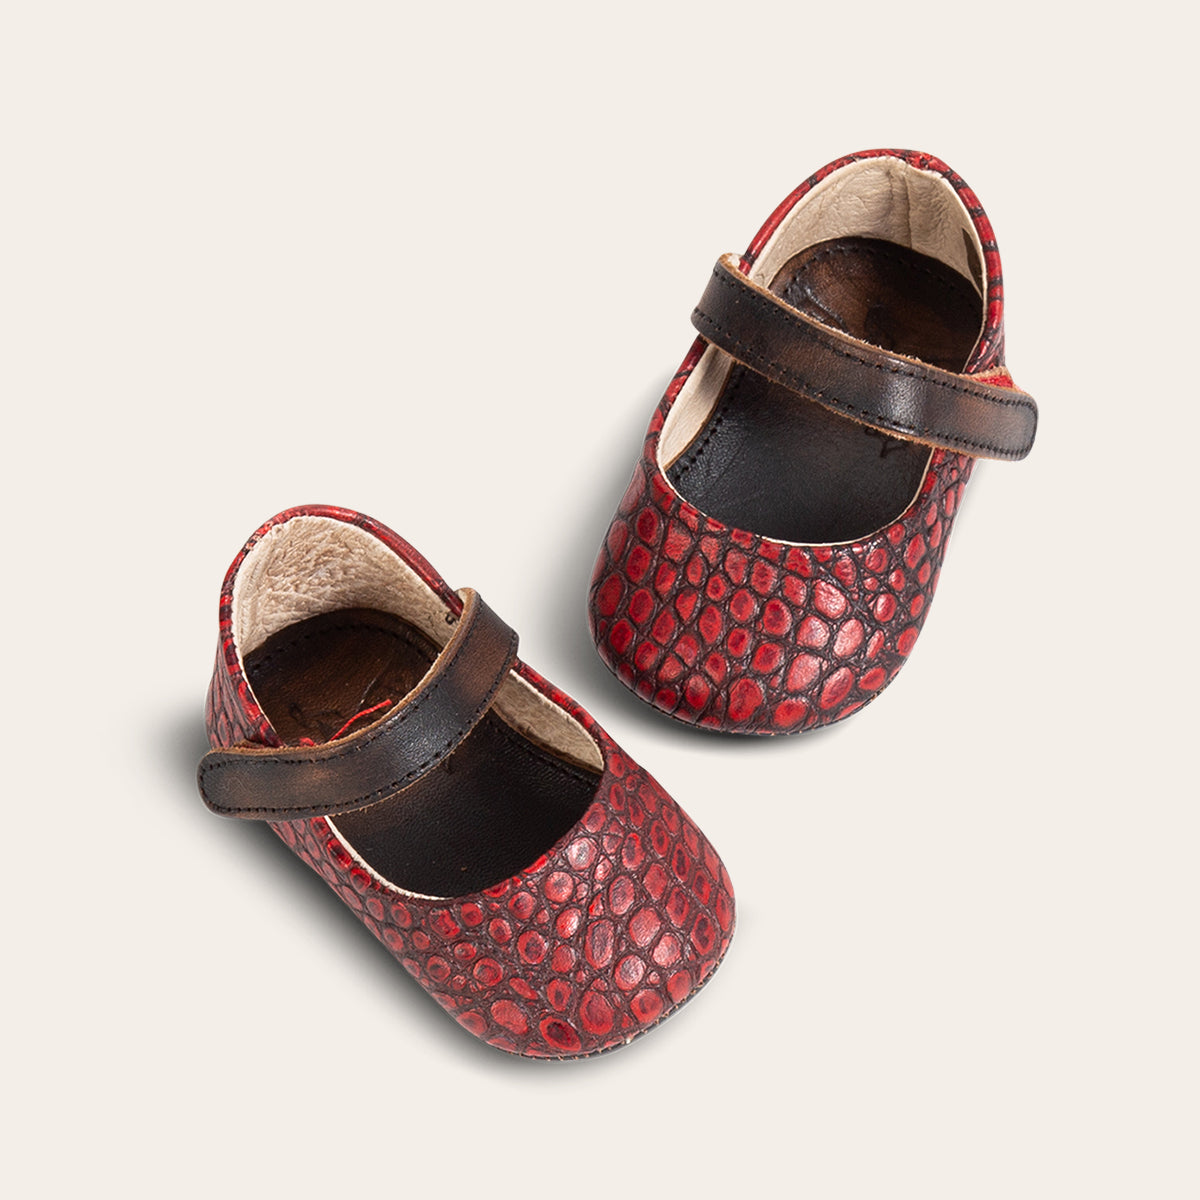 front and side view showing top leather strap on FREEBIRD infant baby Jane red croco leather shoe